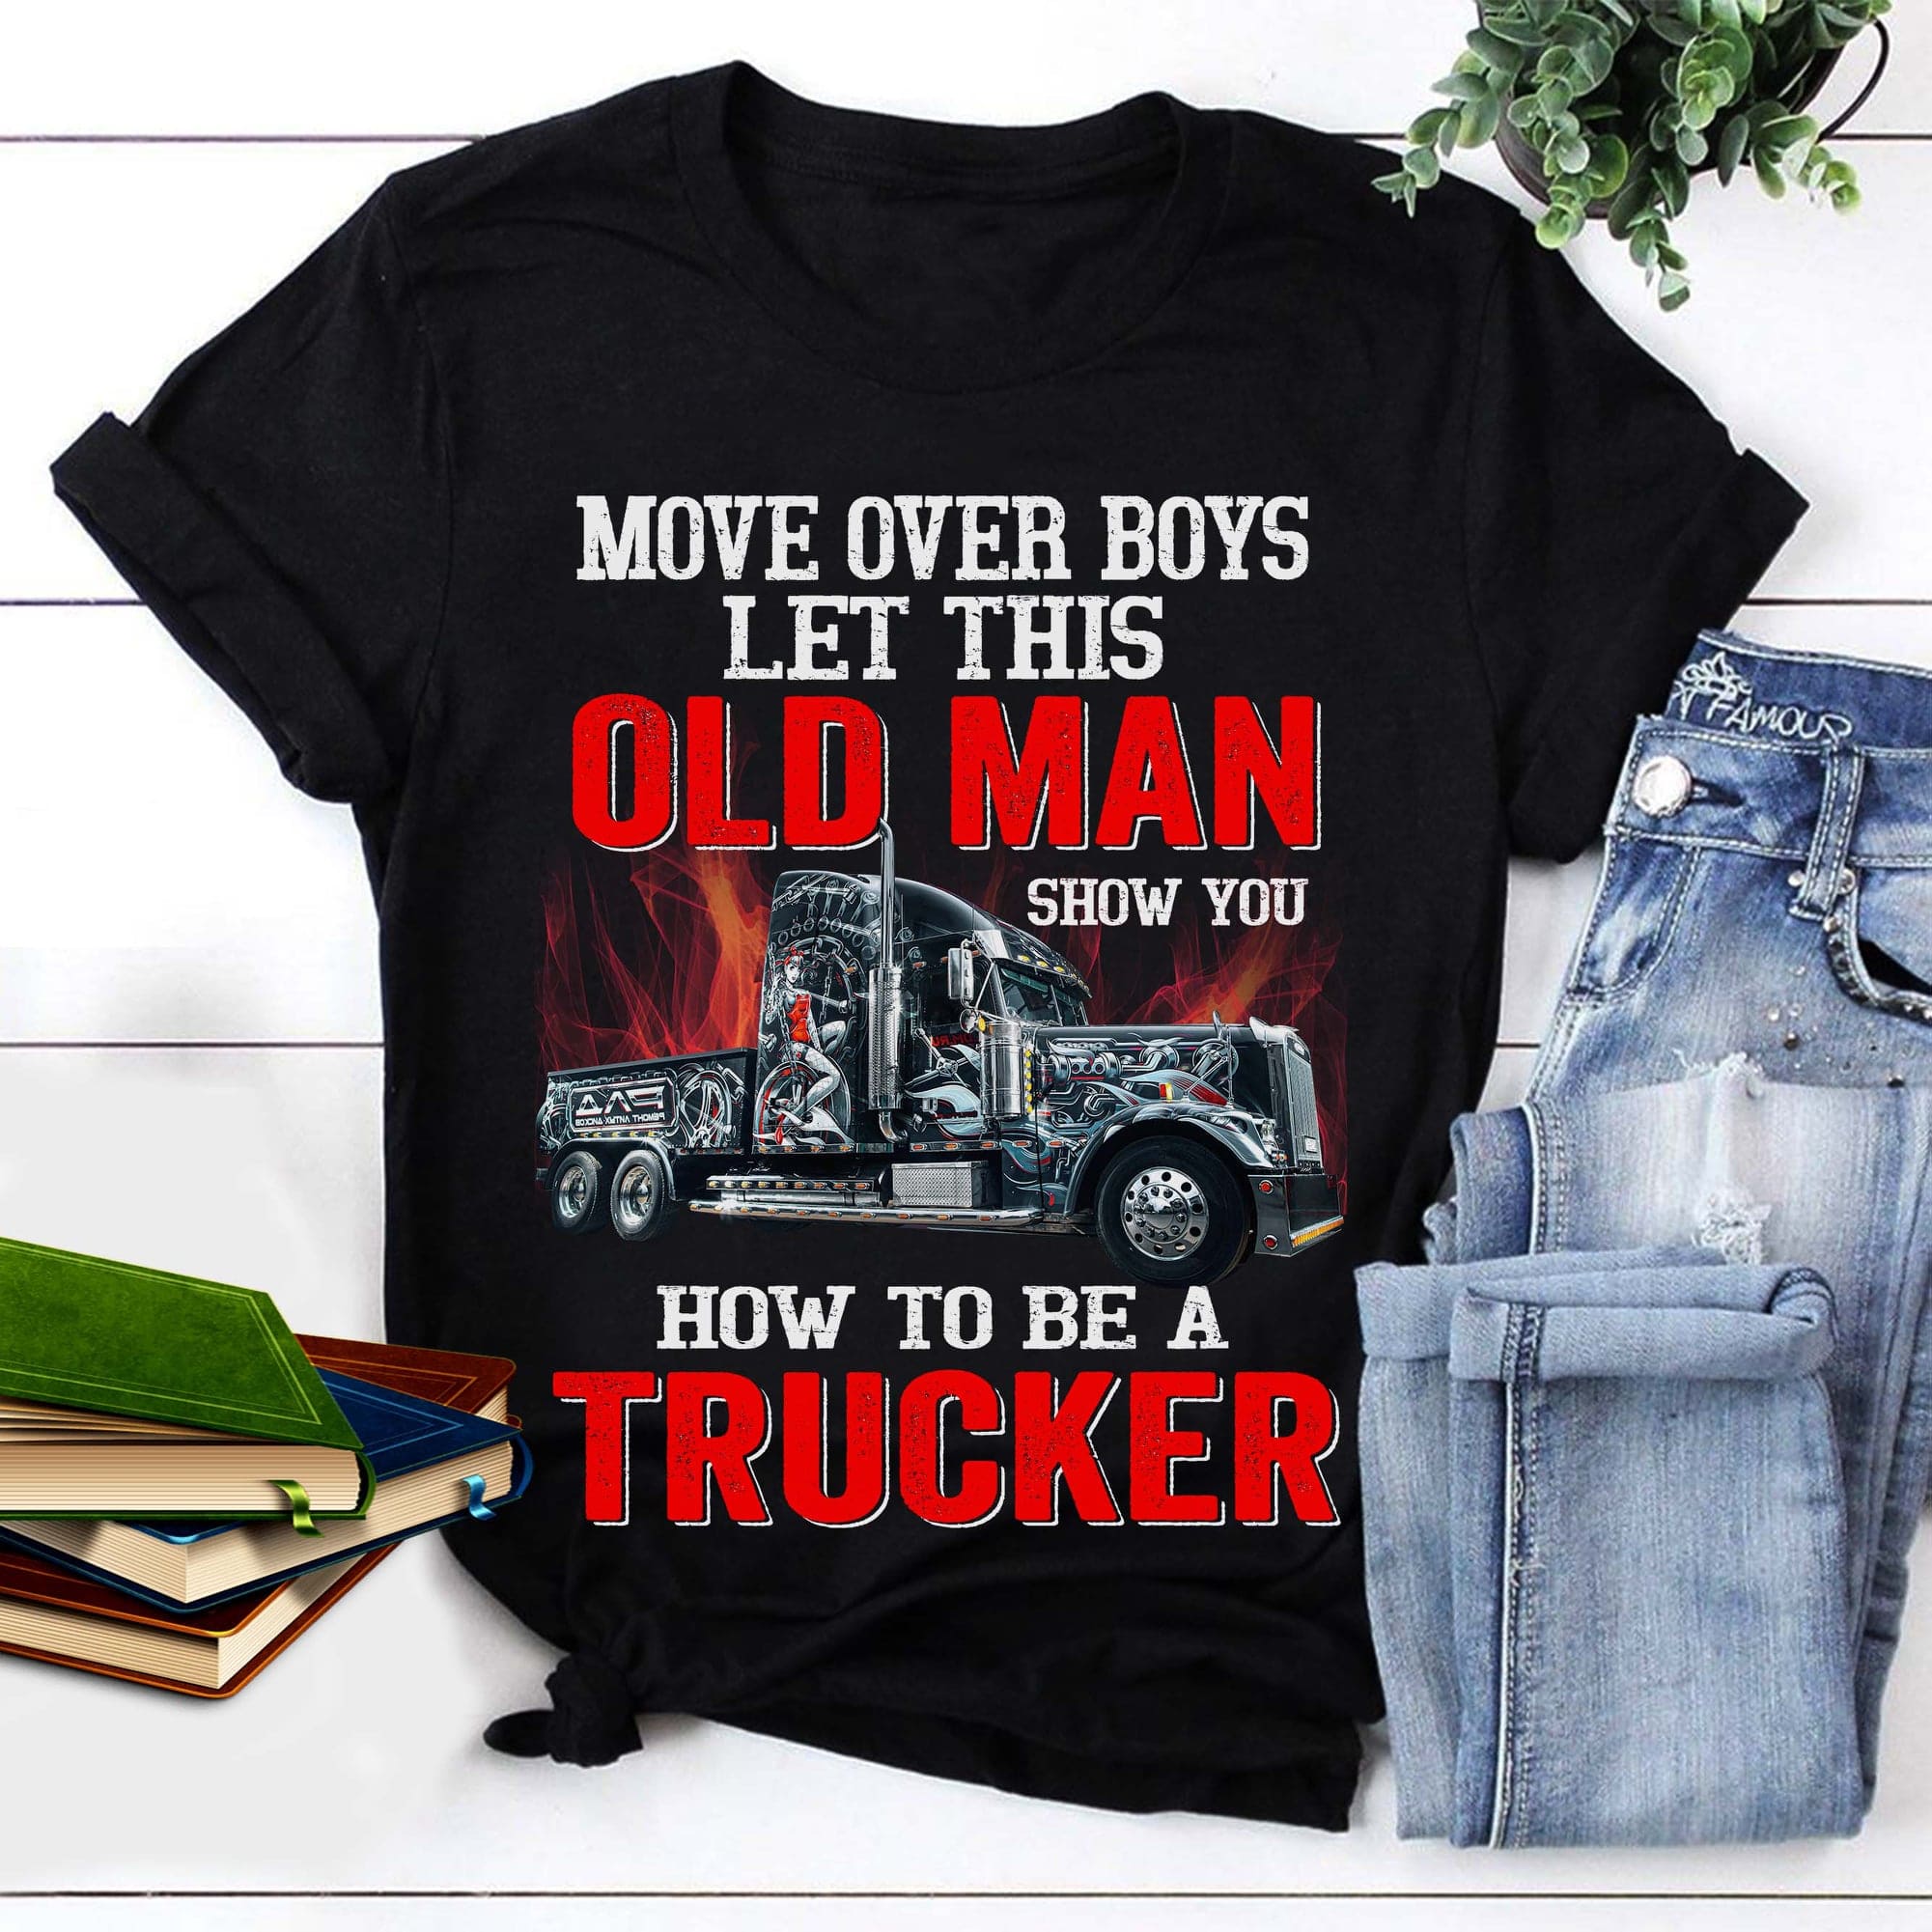 Move over boys, let this old man show you how to be a trucker - Gift for truck driver, old trucker